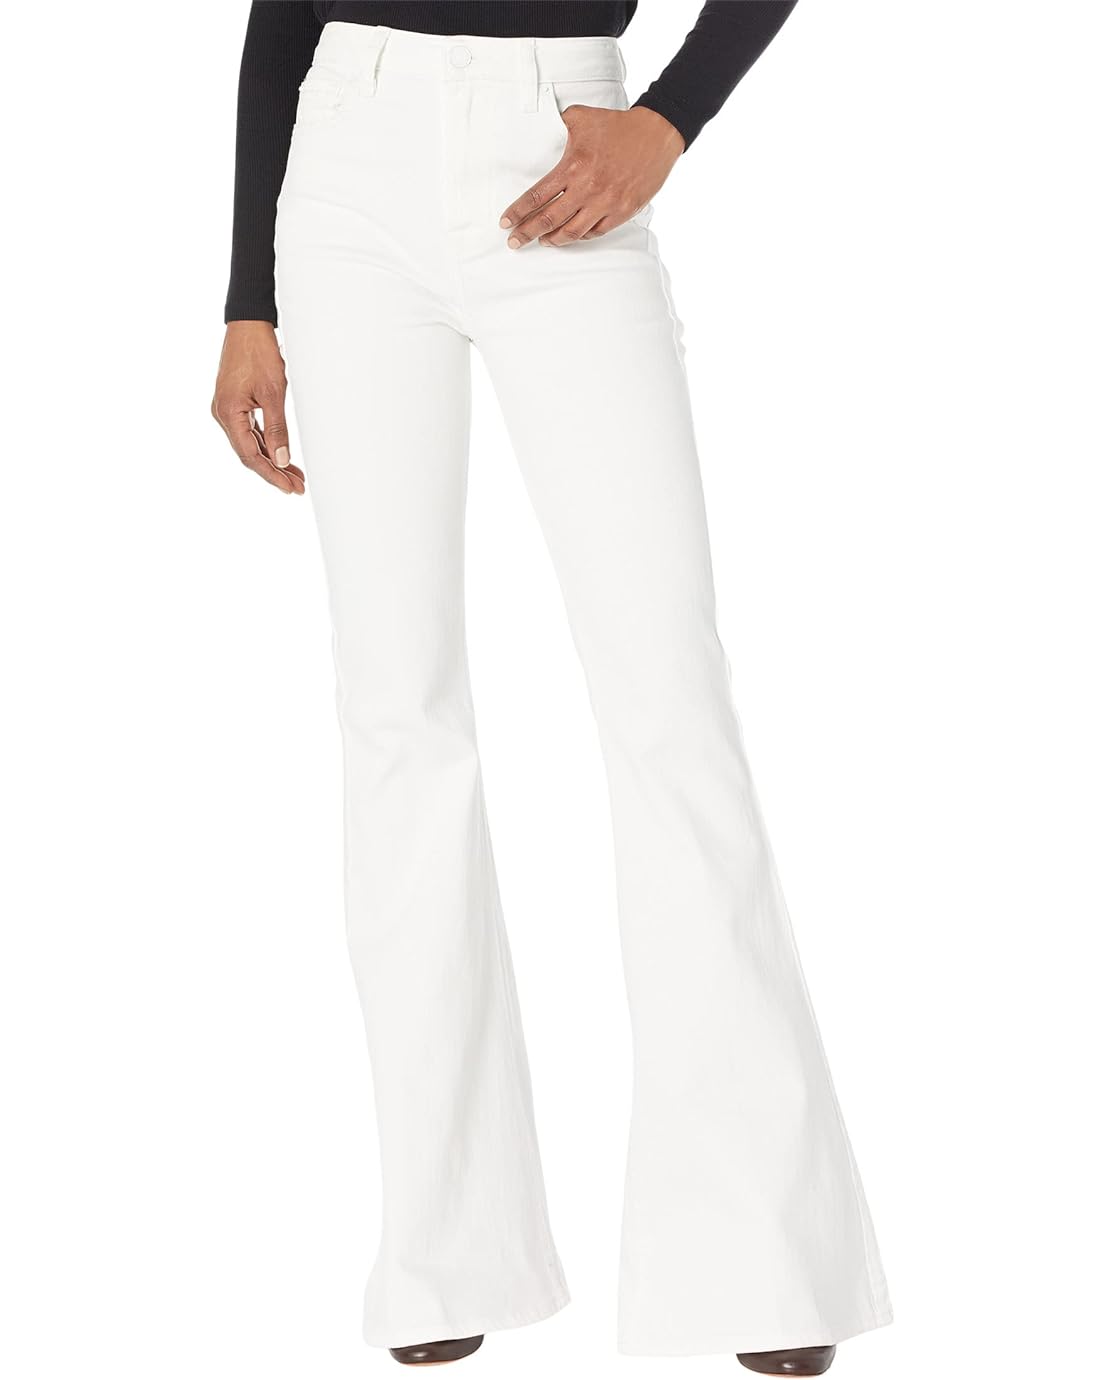 7 For All Mankind Megaflare in Clean White